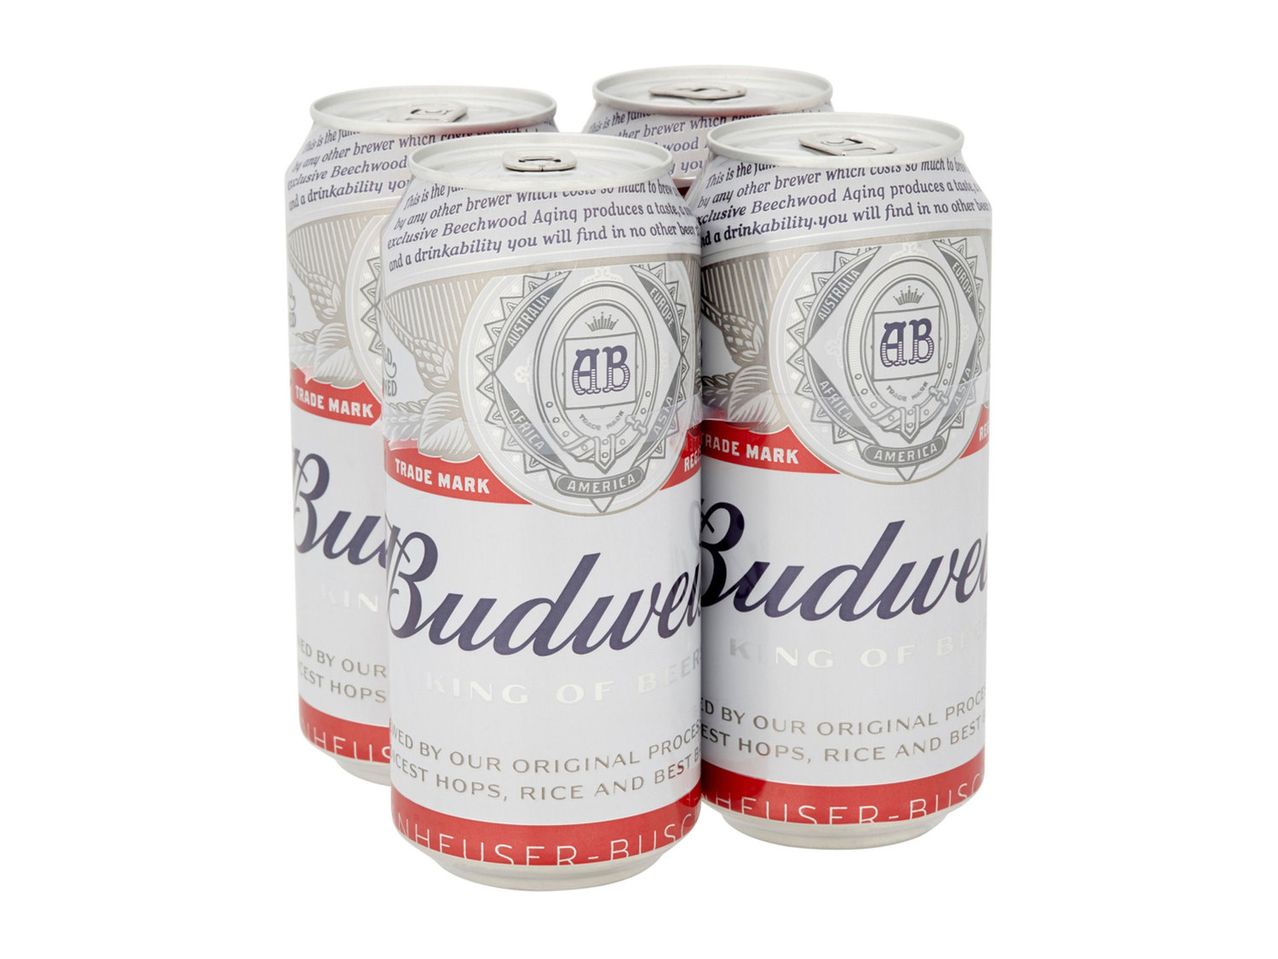 Go to full screen view: Budweiser - Image 1